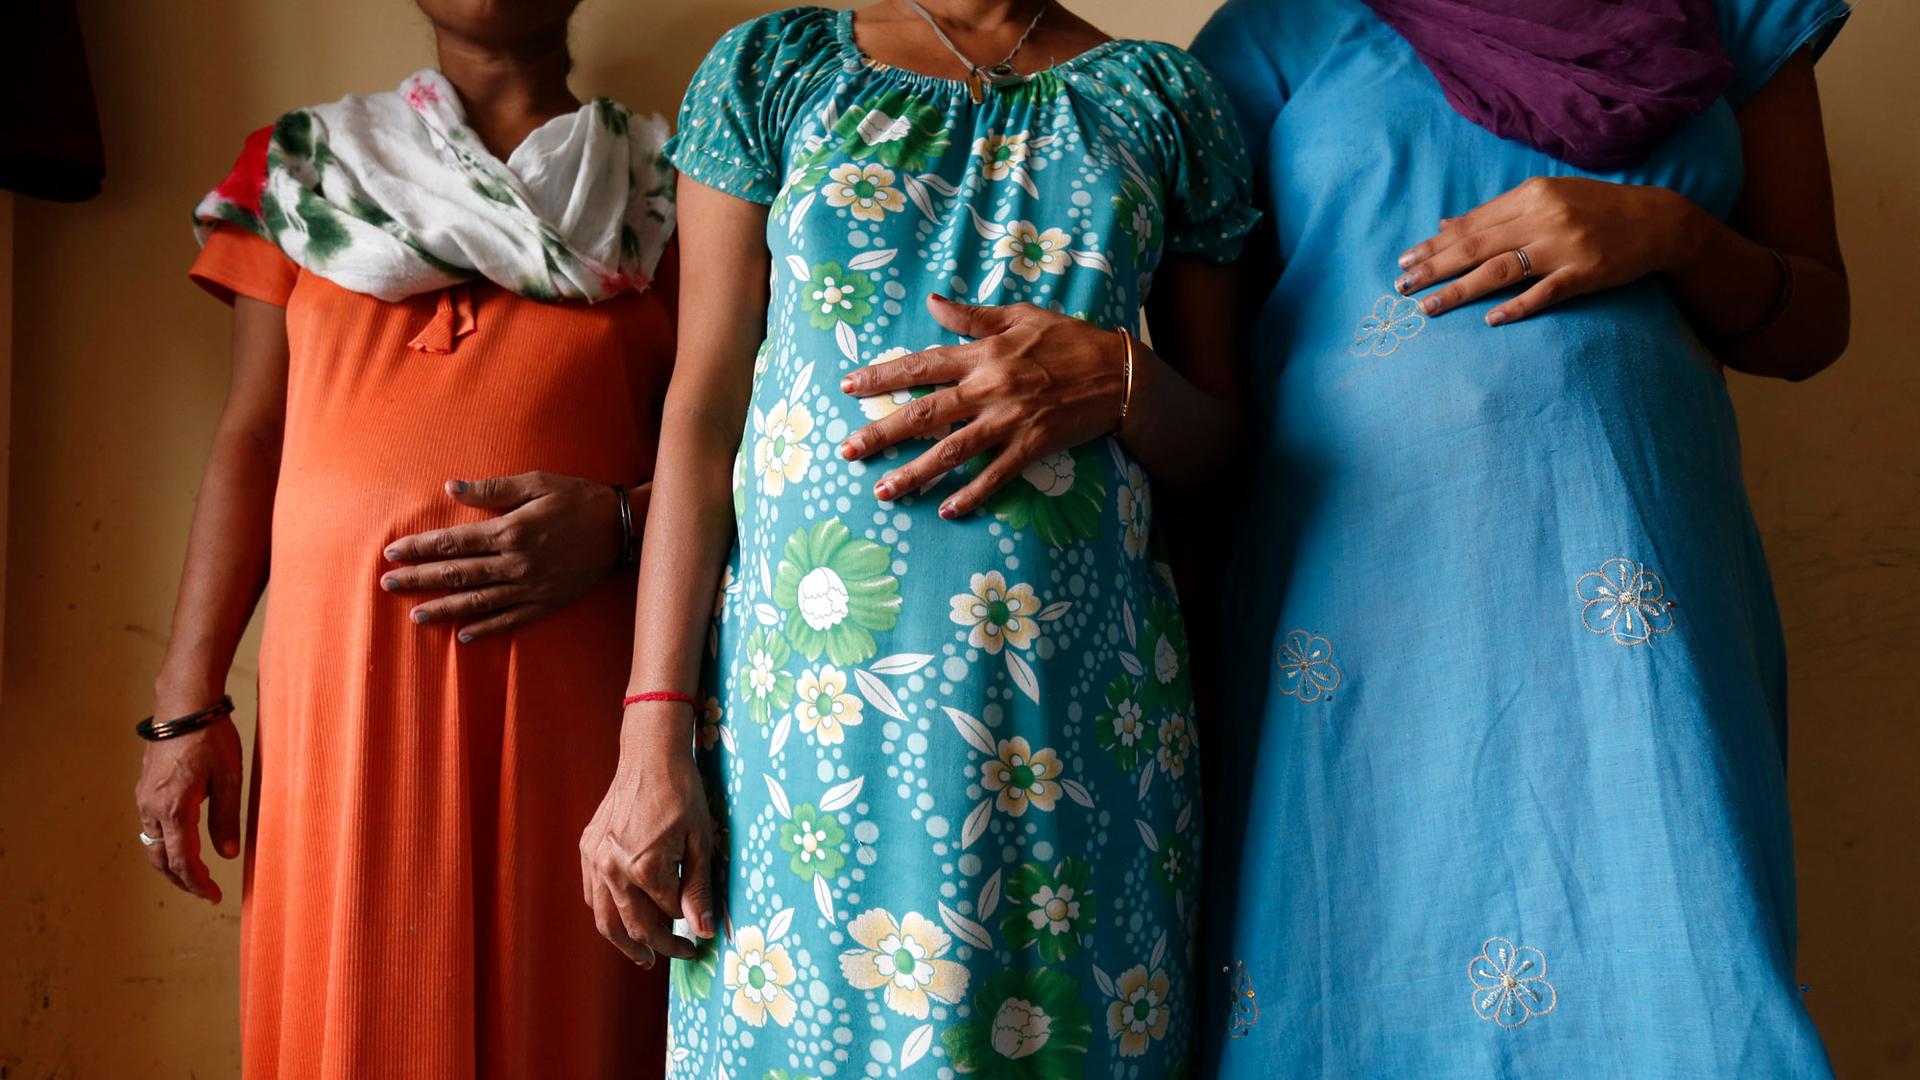 Three women stand in a line with their hands on their visibly pregnant stomachs. Their faces are cropped out of the image. 